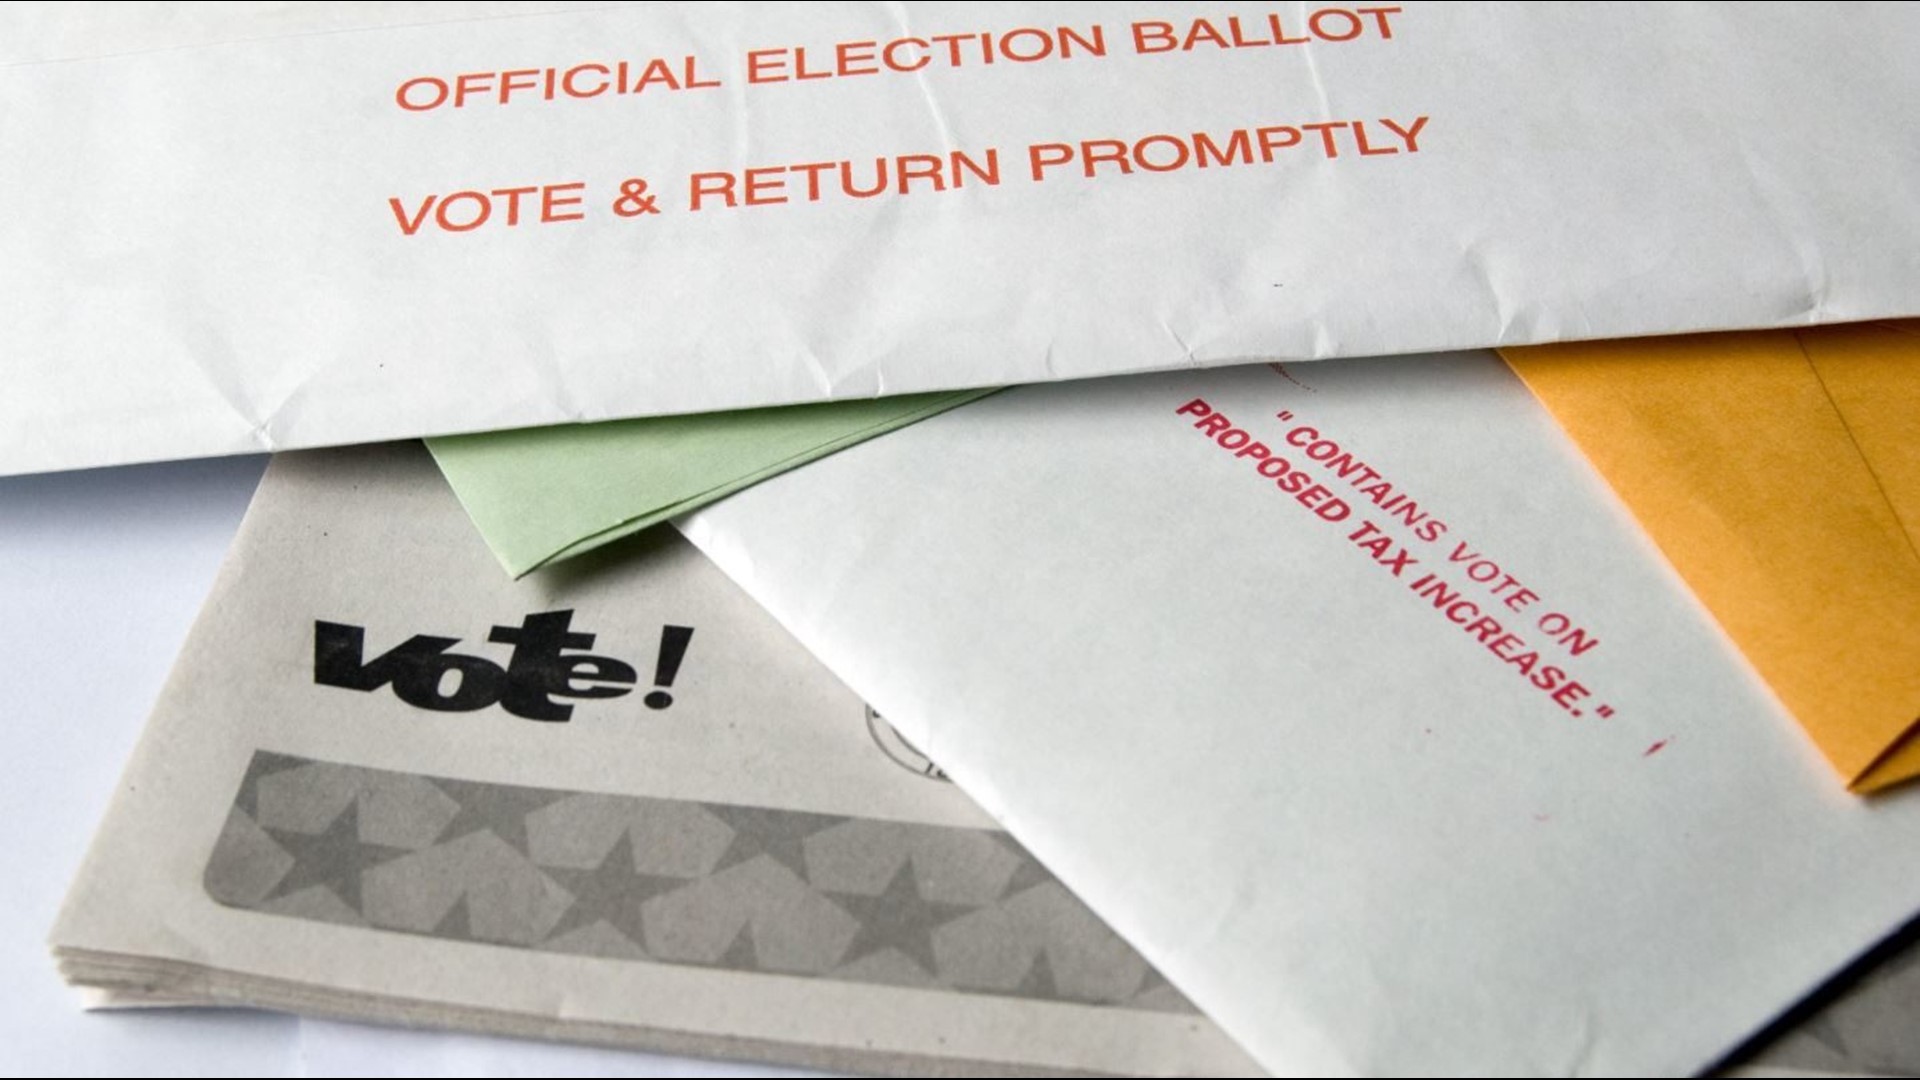 King County unveiled a new plan to prepay postage for county election ballots.